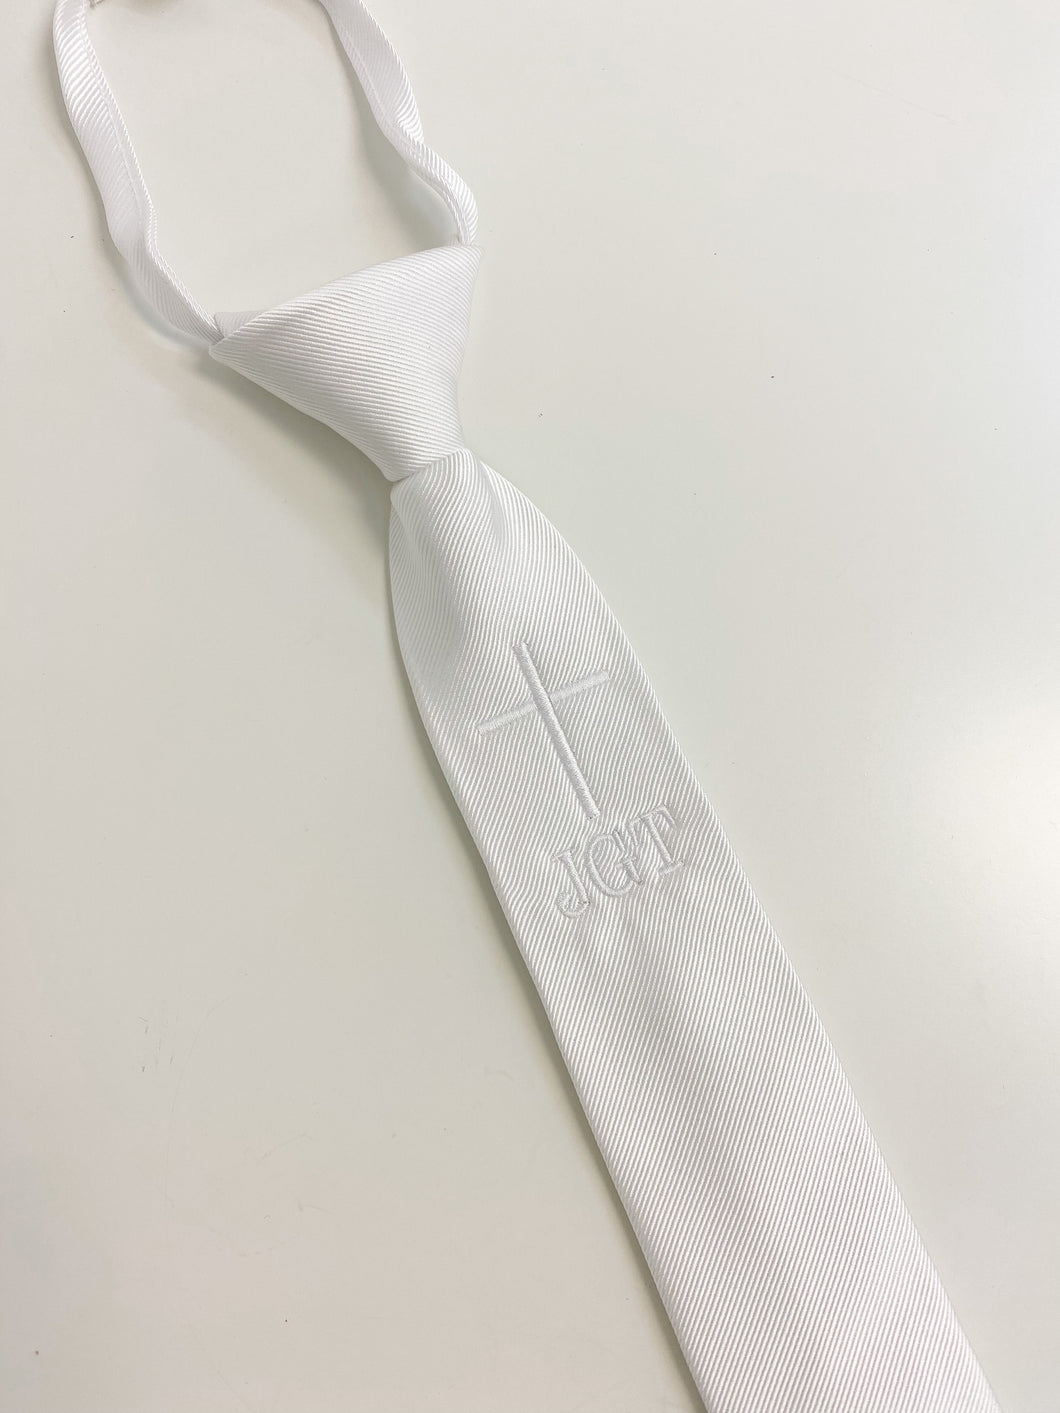 White Cross Embroidered Kid's Tie